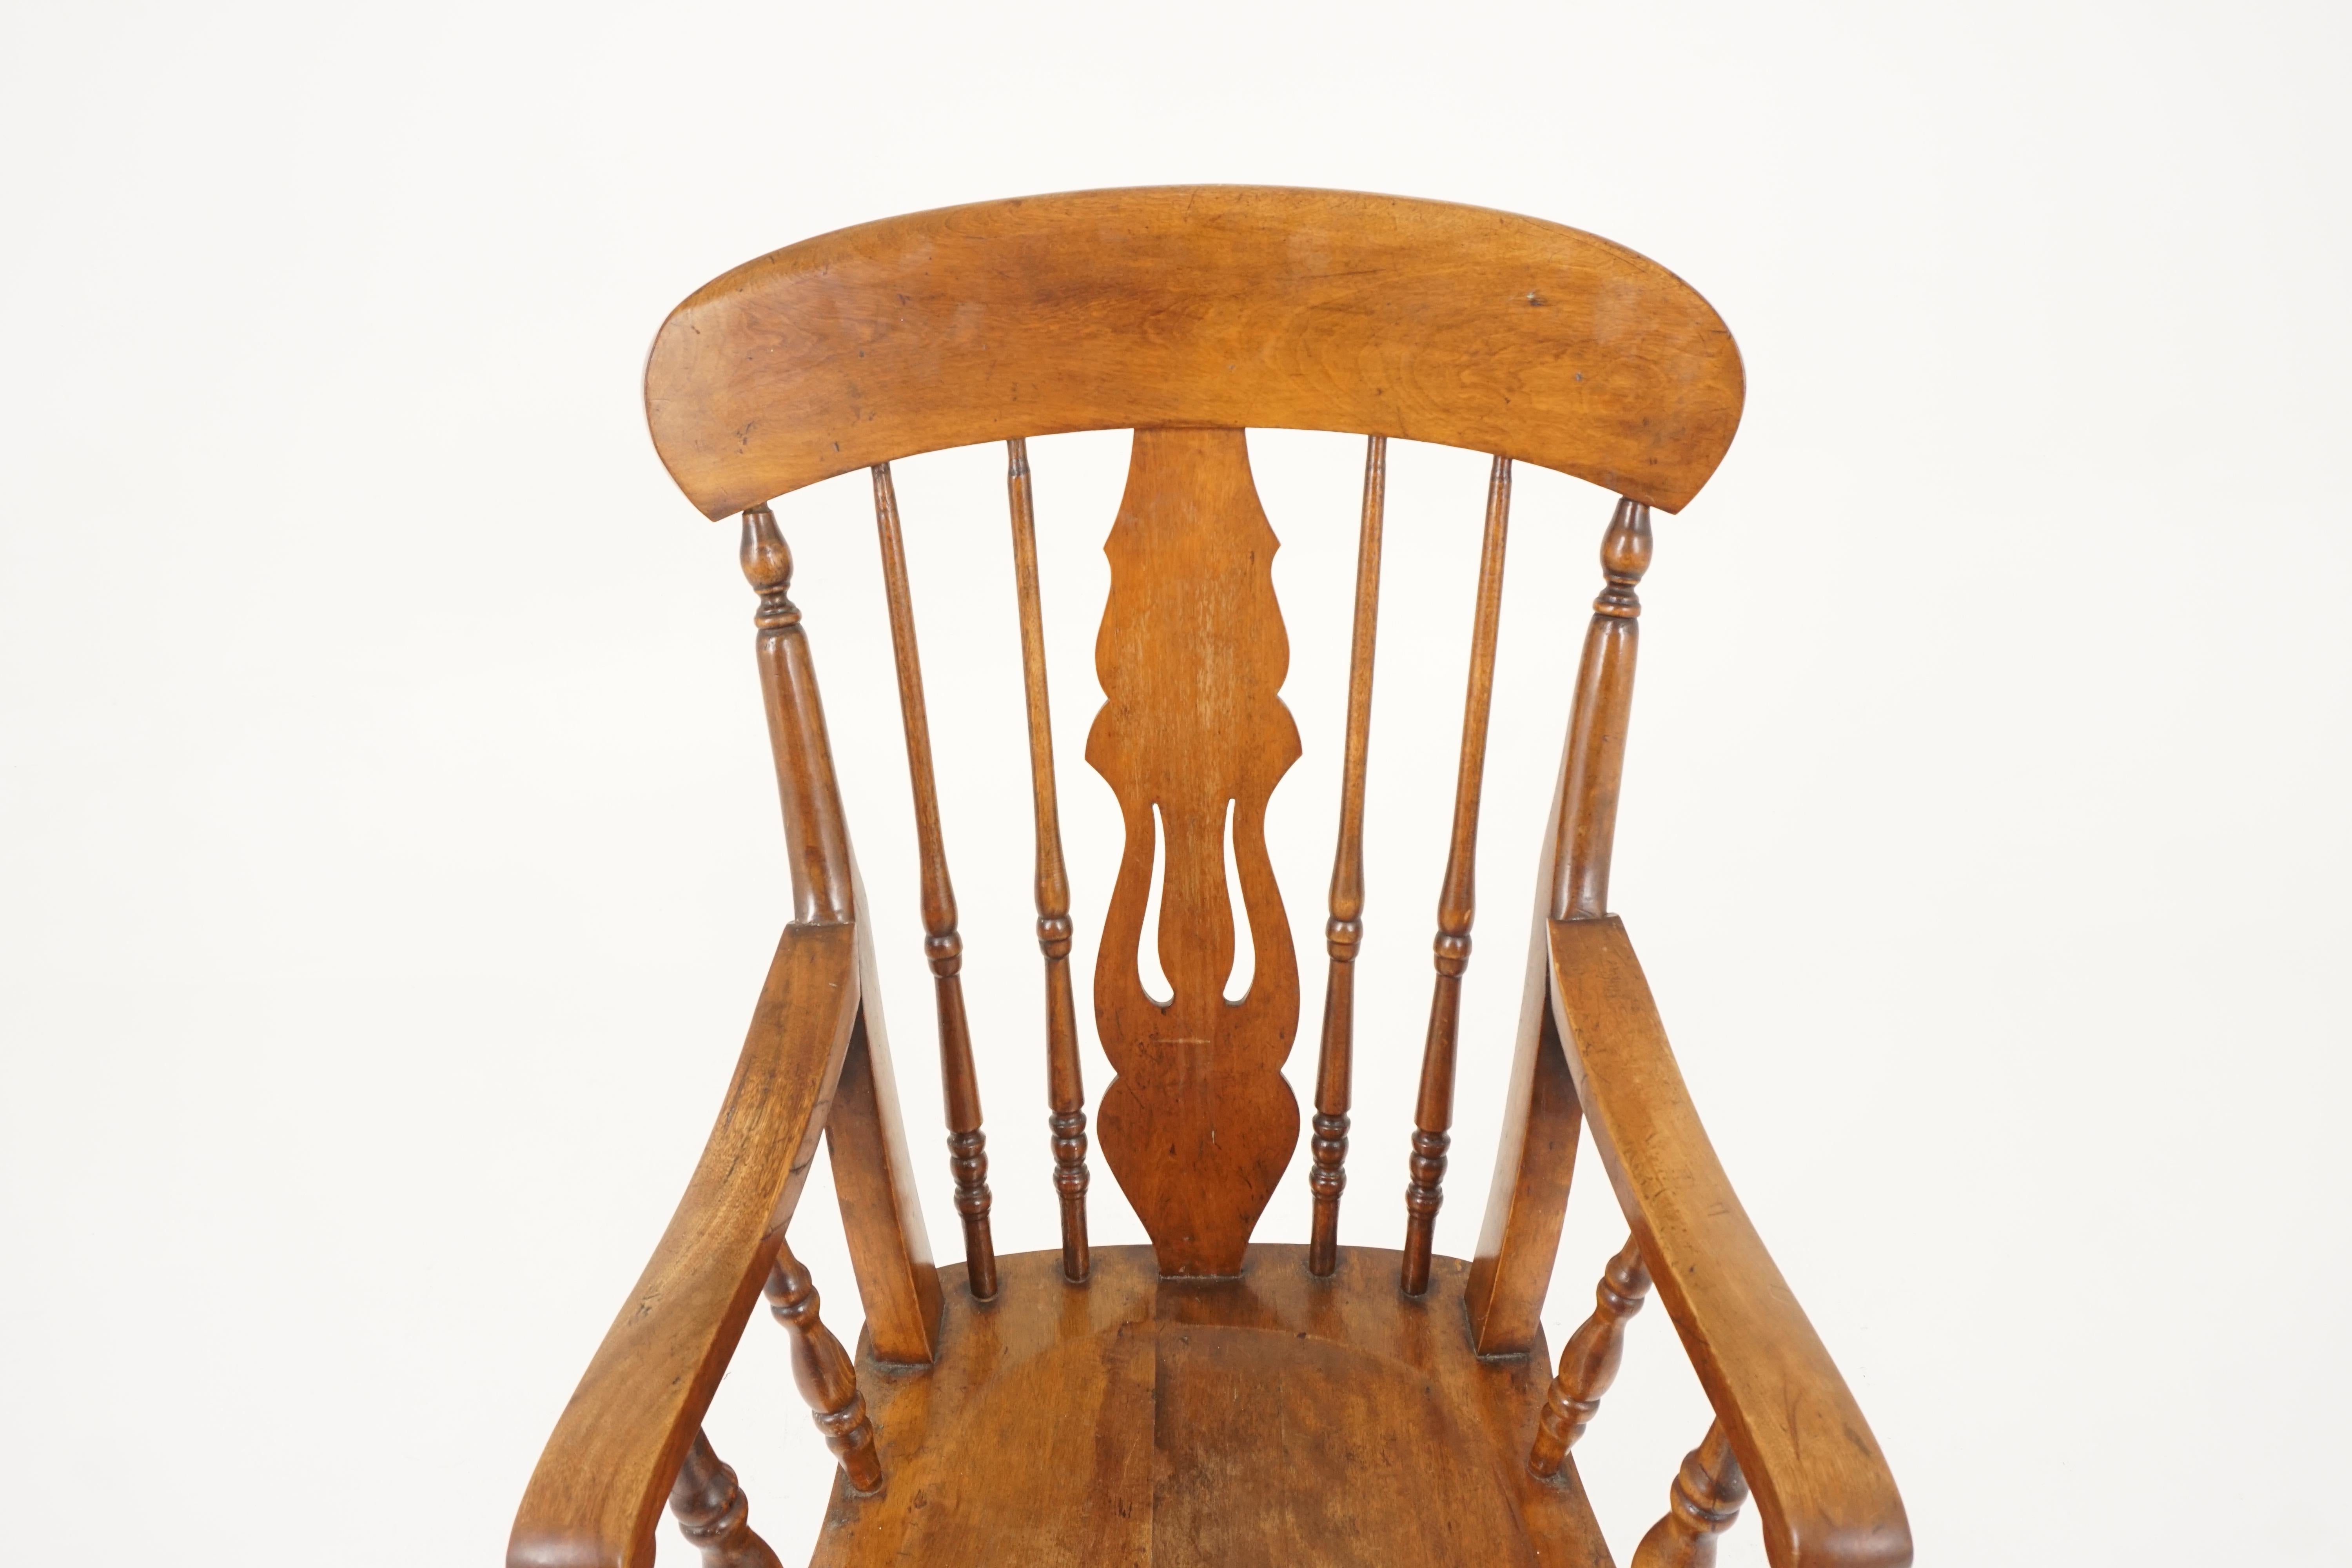 Hand-Crafted Antique Arm Chair, Windsor High Back, Country Beech Chair, Scotland 1880, B2366